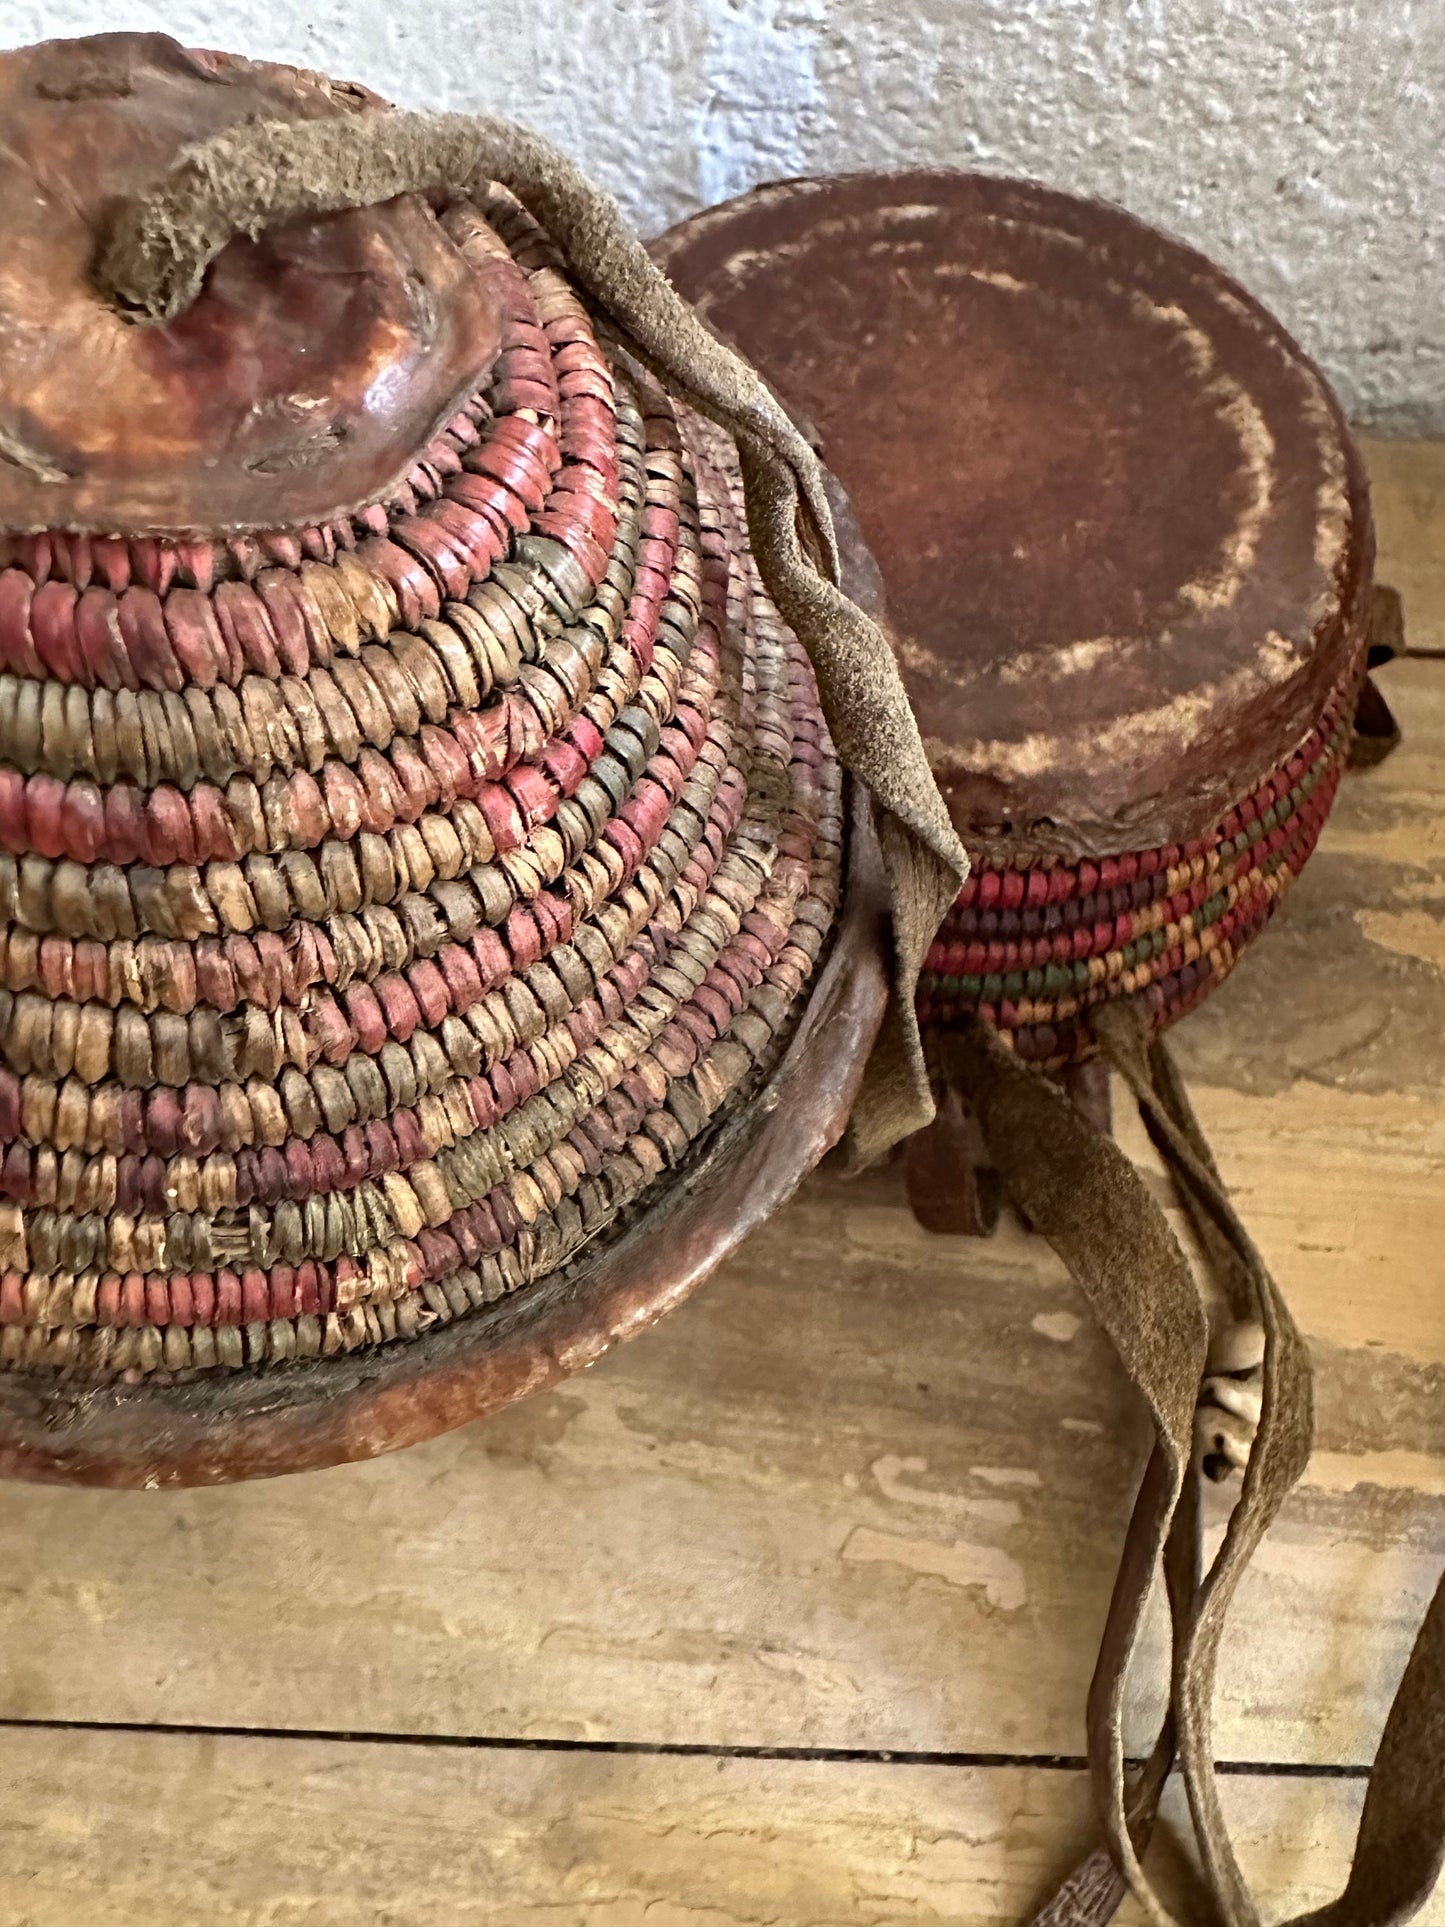 Vintage Handwoven African Basket with Cover, Straps and Cowry Shells